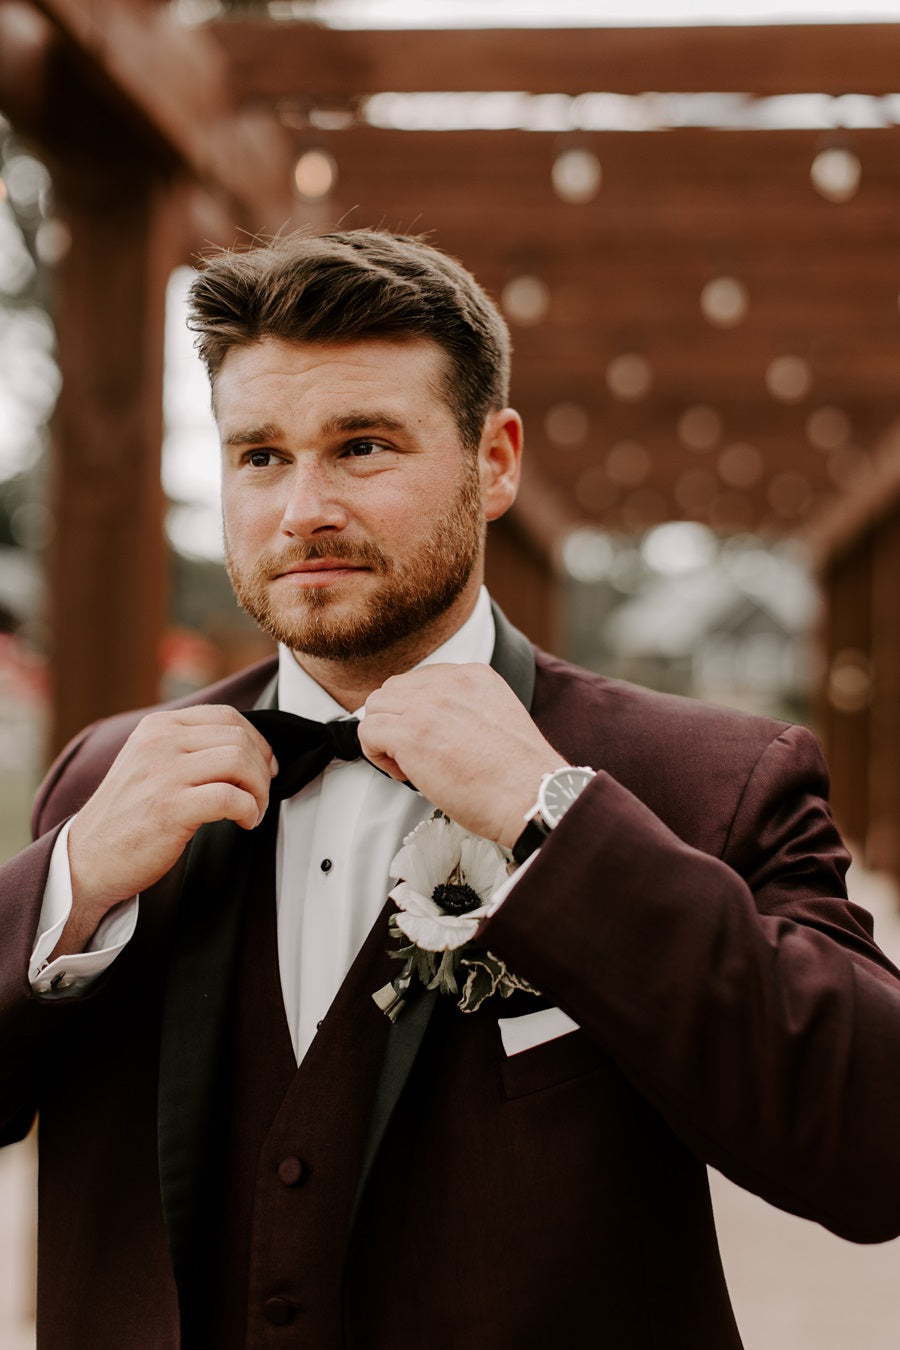 Groom adjusting his bow tie. He is in a dark burgundy suit with a white/black floral boutonniere.